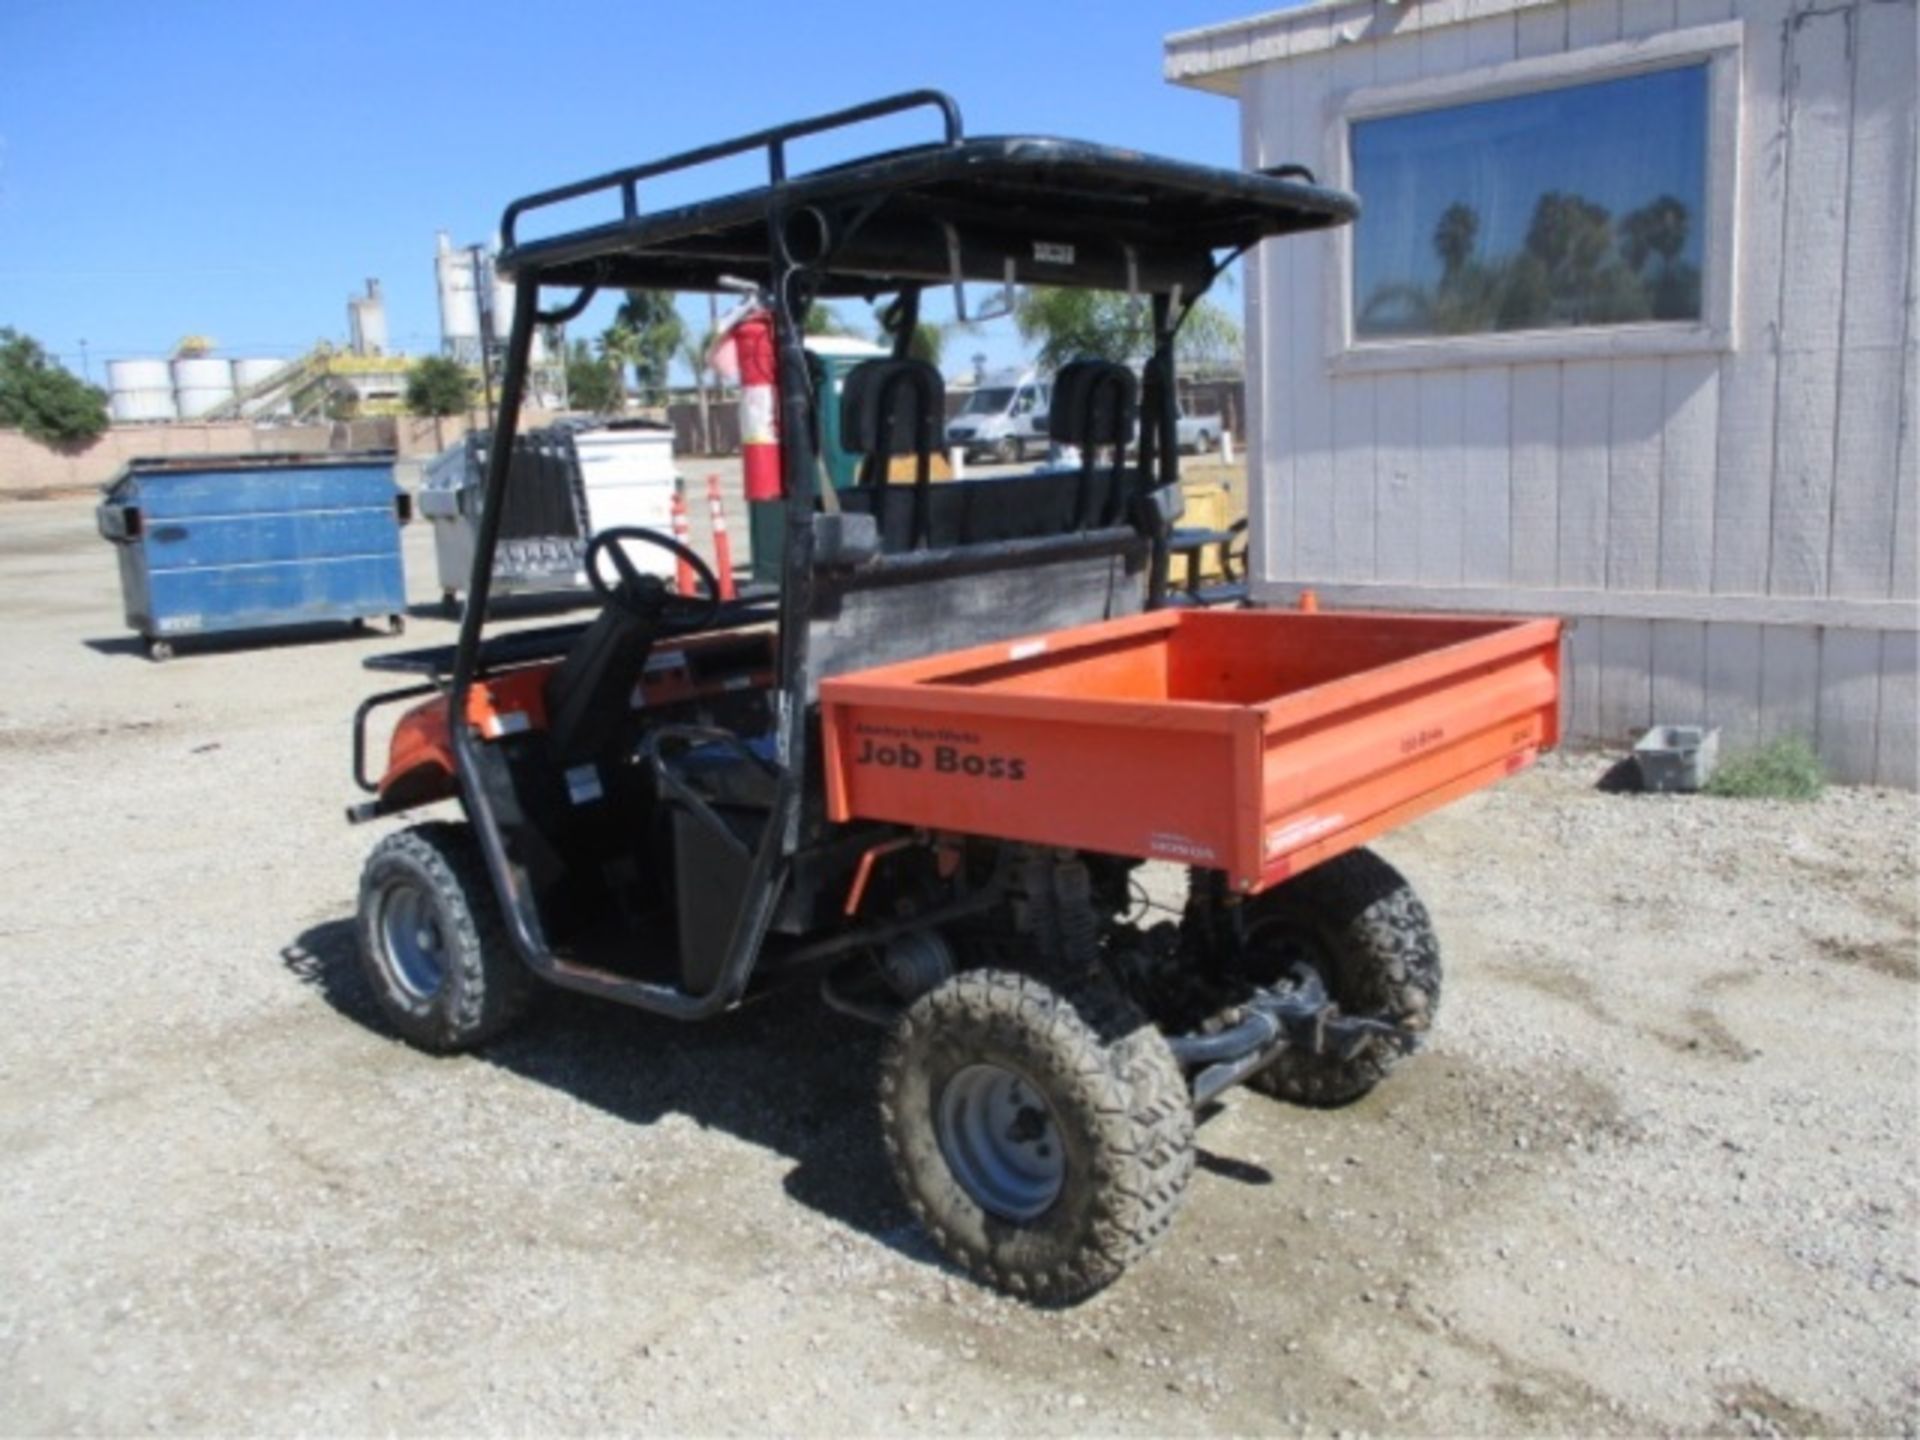 2008 American Sportworks Job Boss Utility Cart, Honda Gas, Rear Metal Dump Bed, Canopy, Tow Hitch, - Image 17 of 50